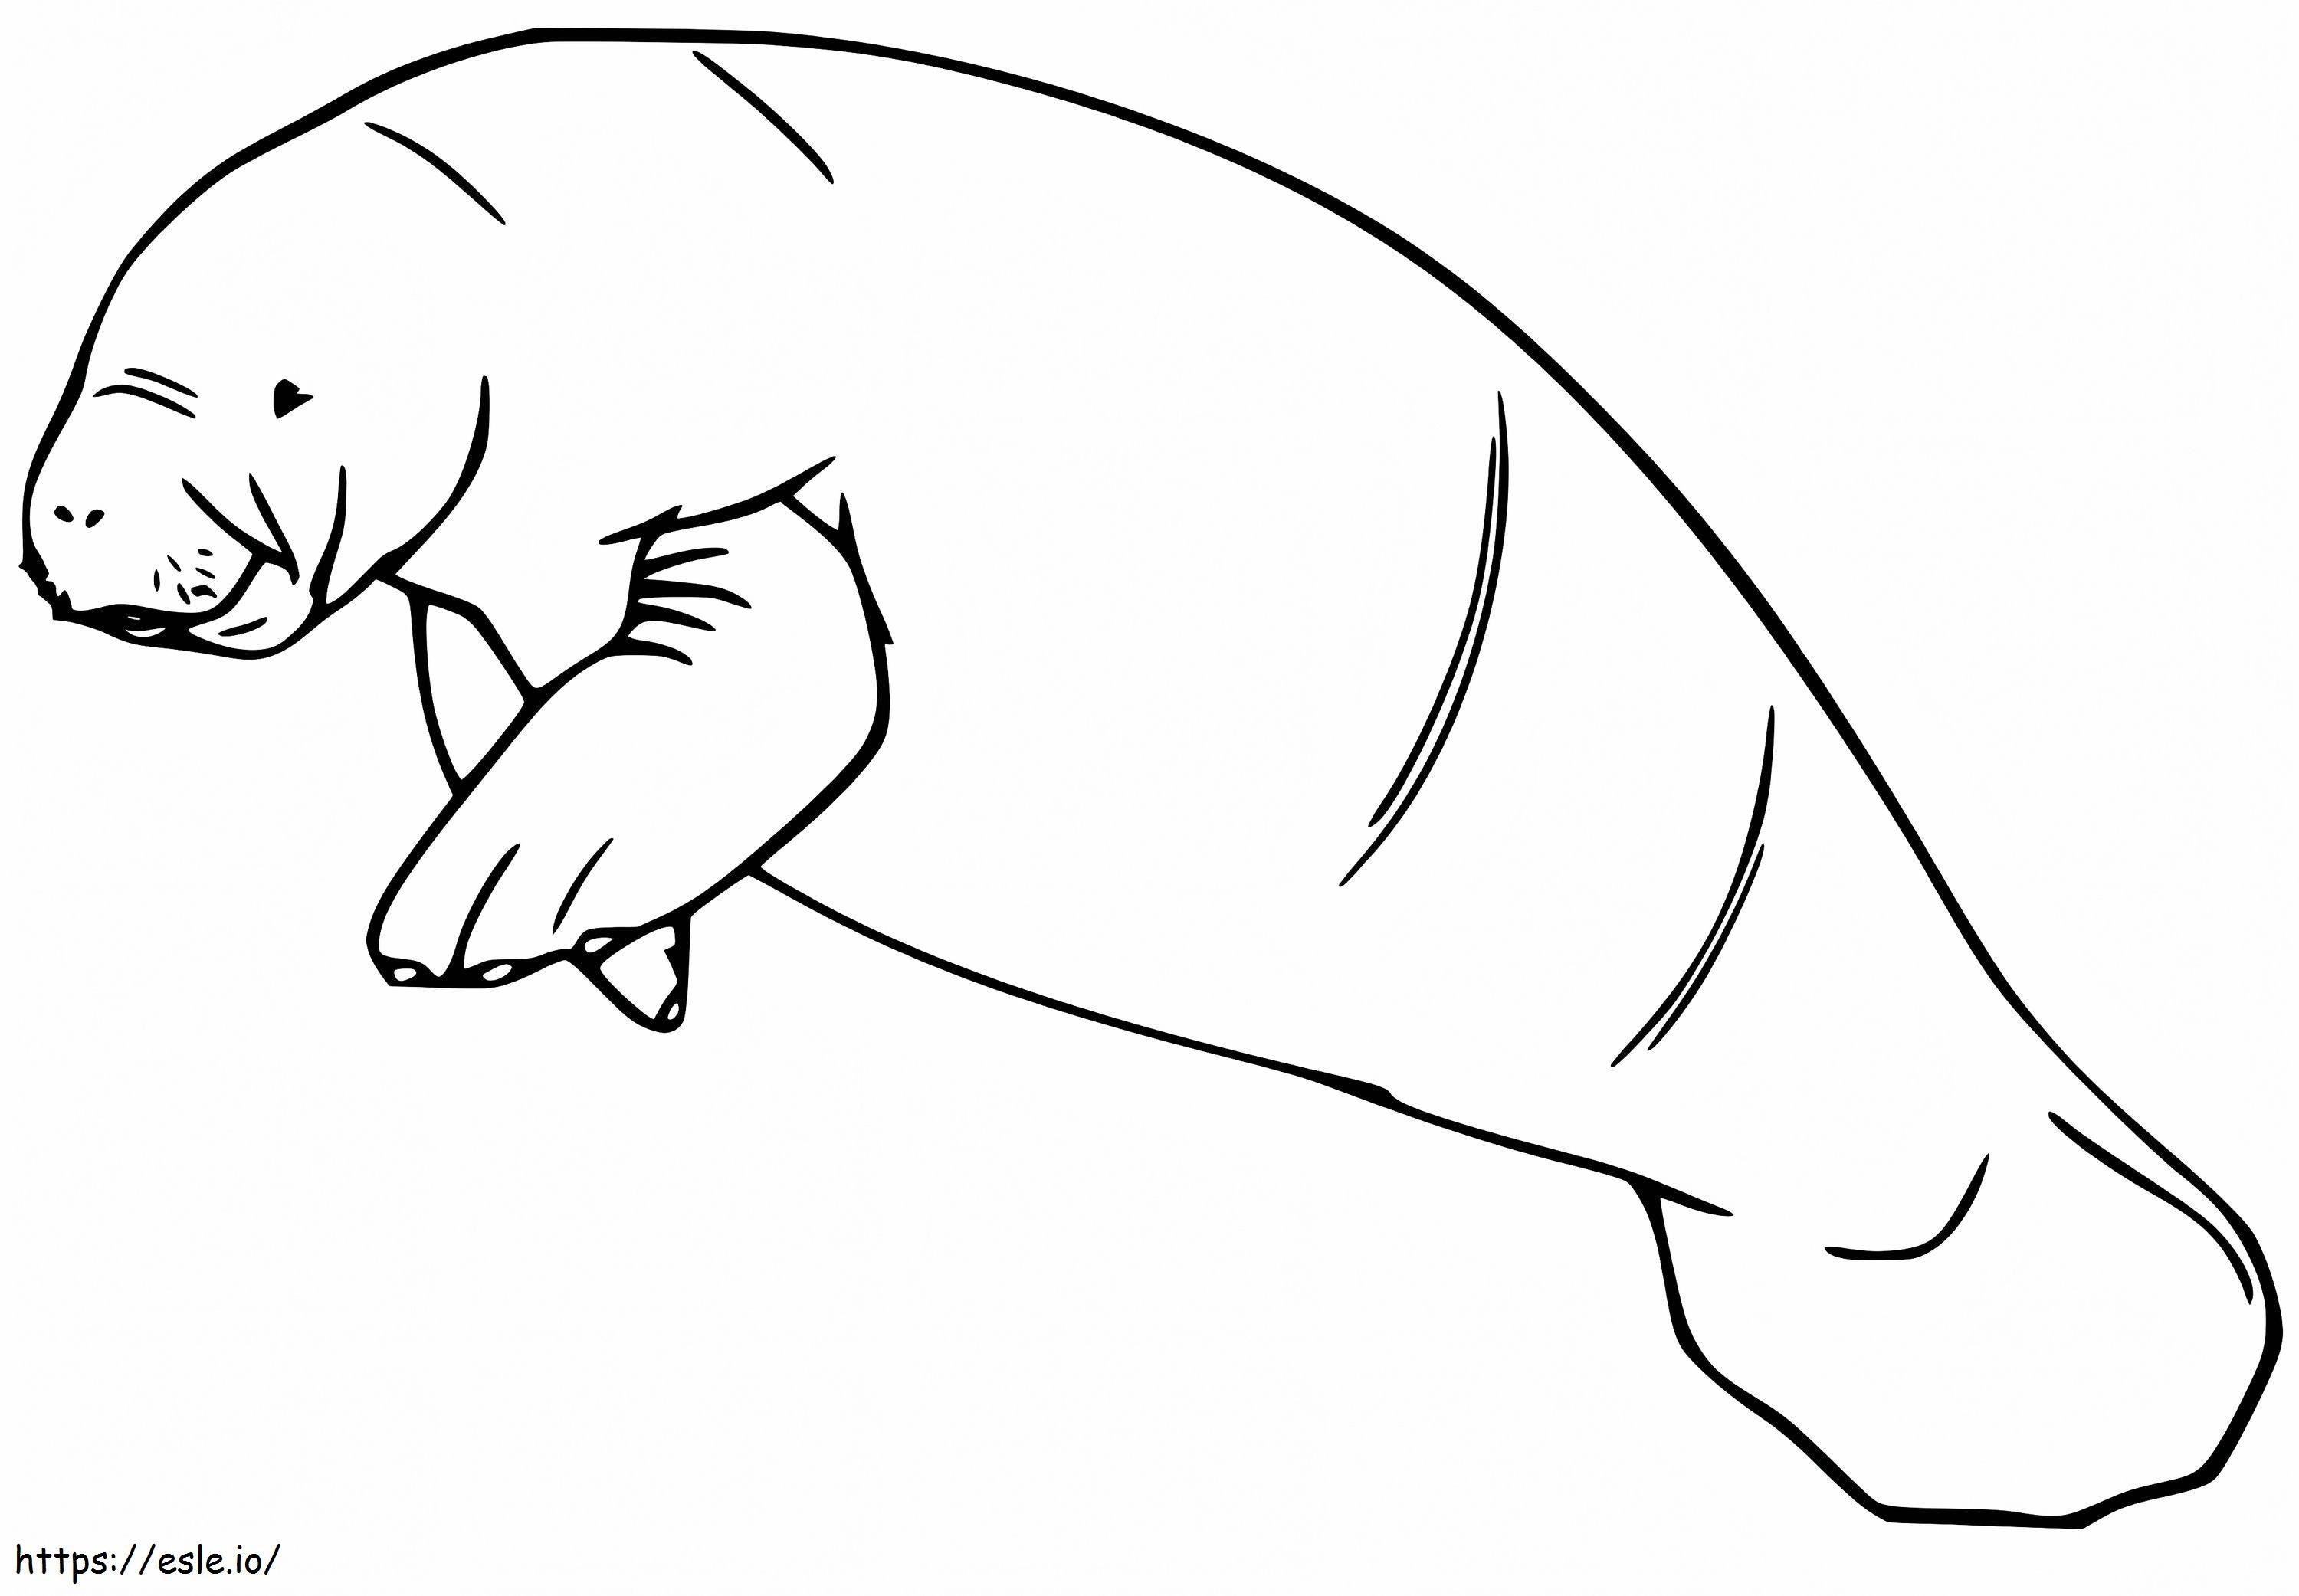 West African Manatee coloring page